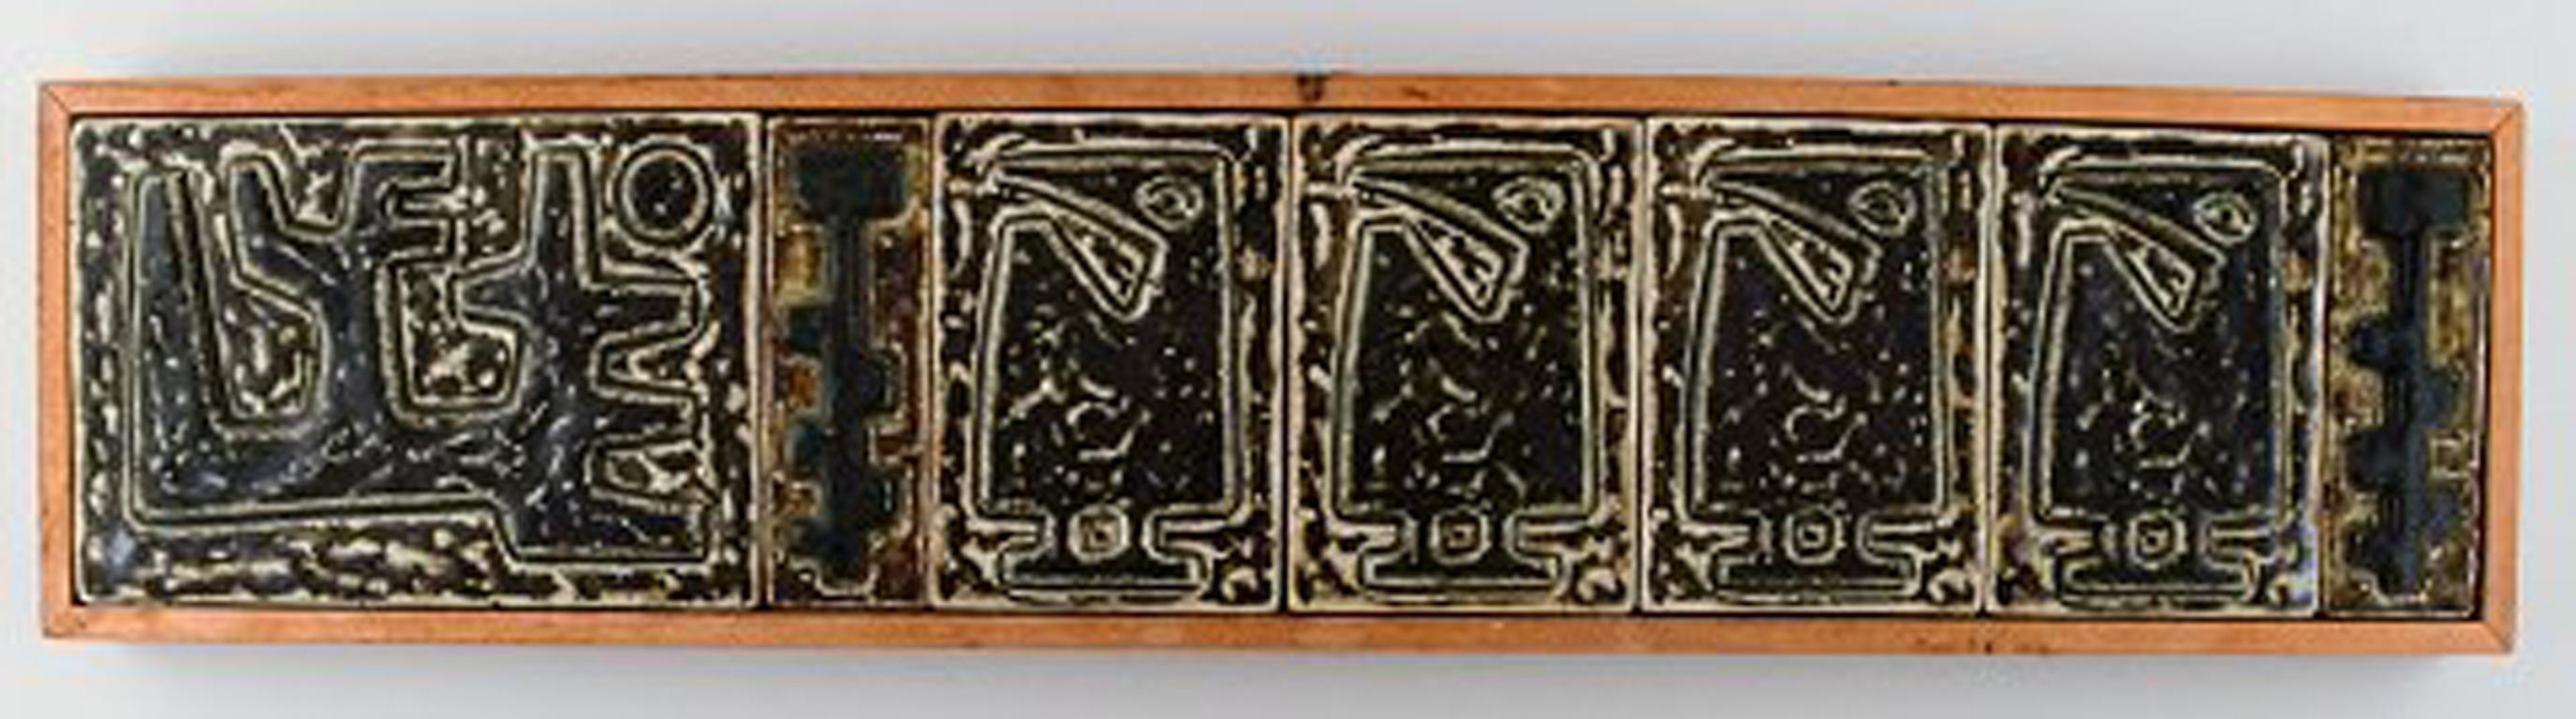 Jørgen Mogensen for Royal Copenhagen. Large wall plaque in the form of seven reliefs decorated with abstract motifs, 1970s.
Measures: 69.5 cm x 15.5 cm.
In perfect condition.